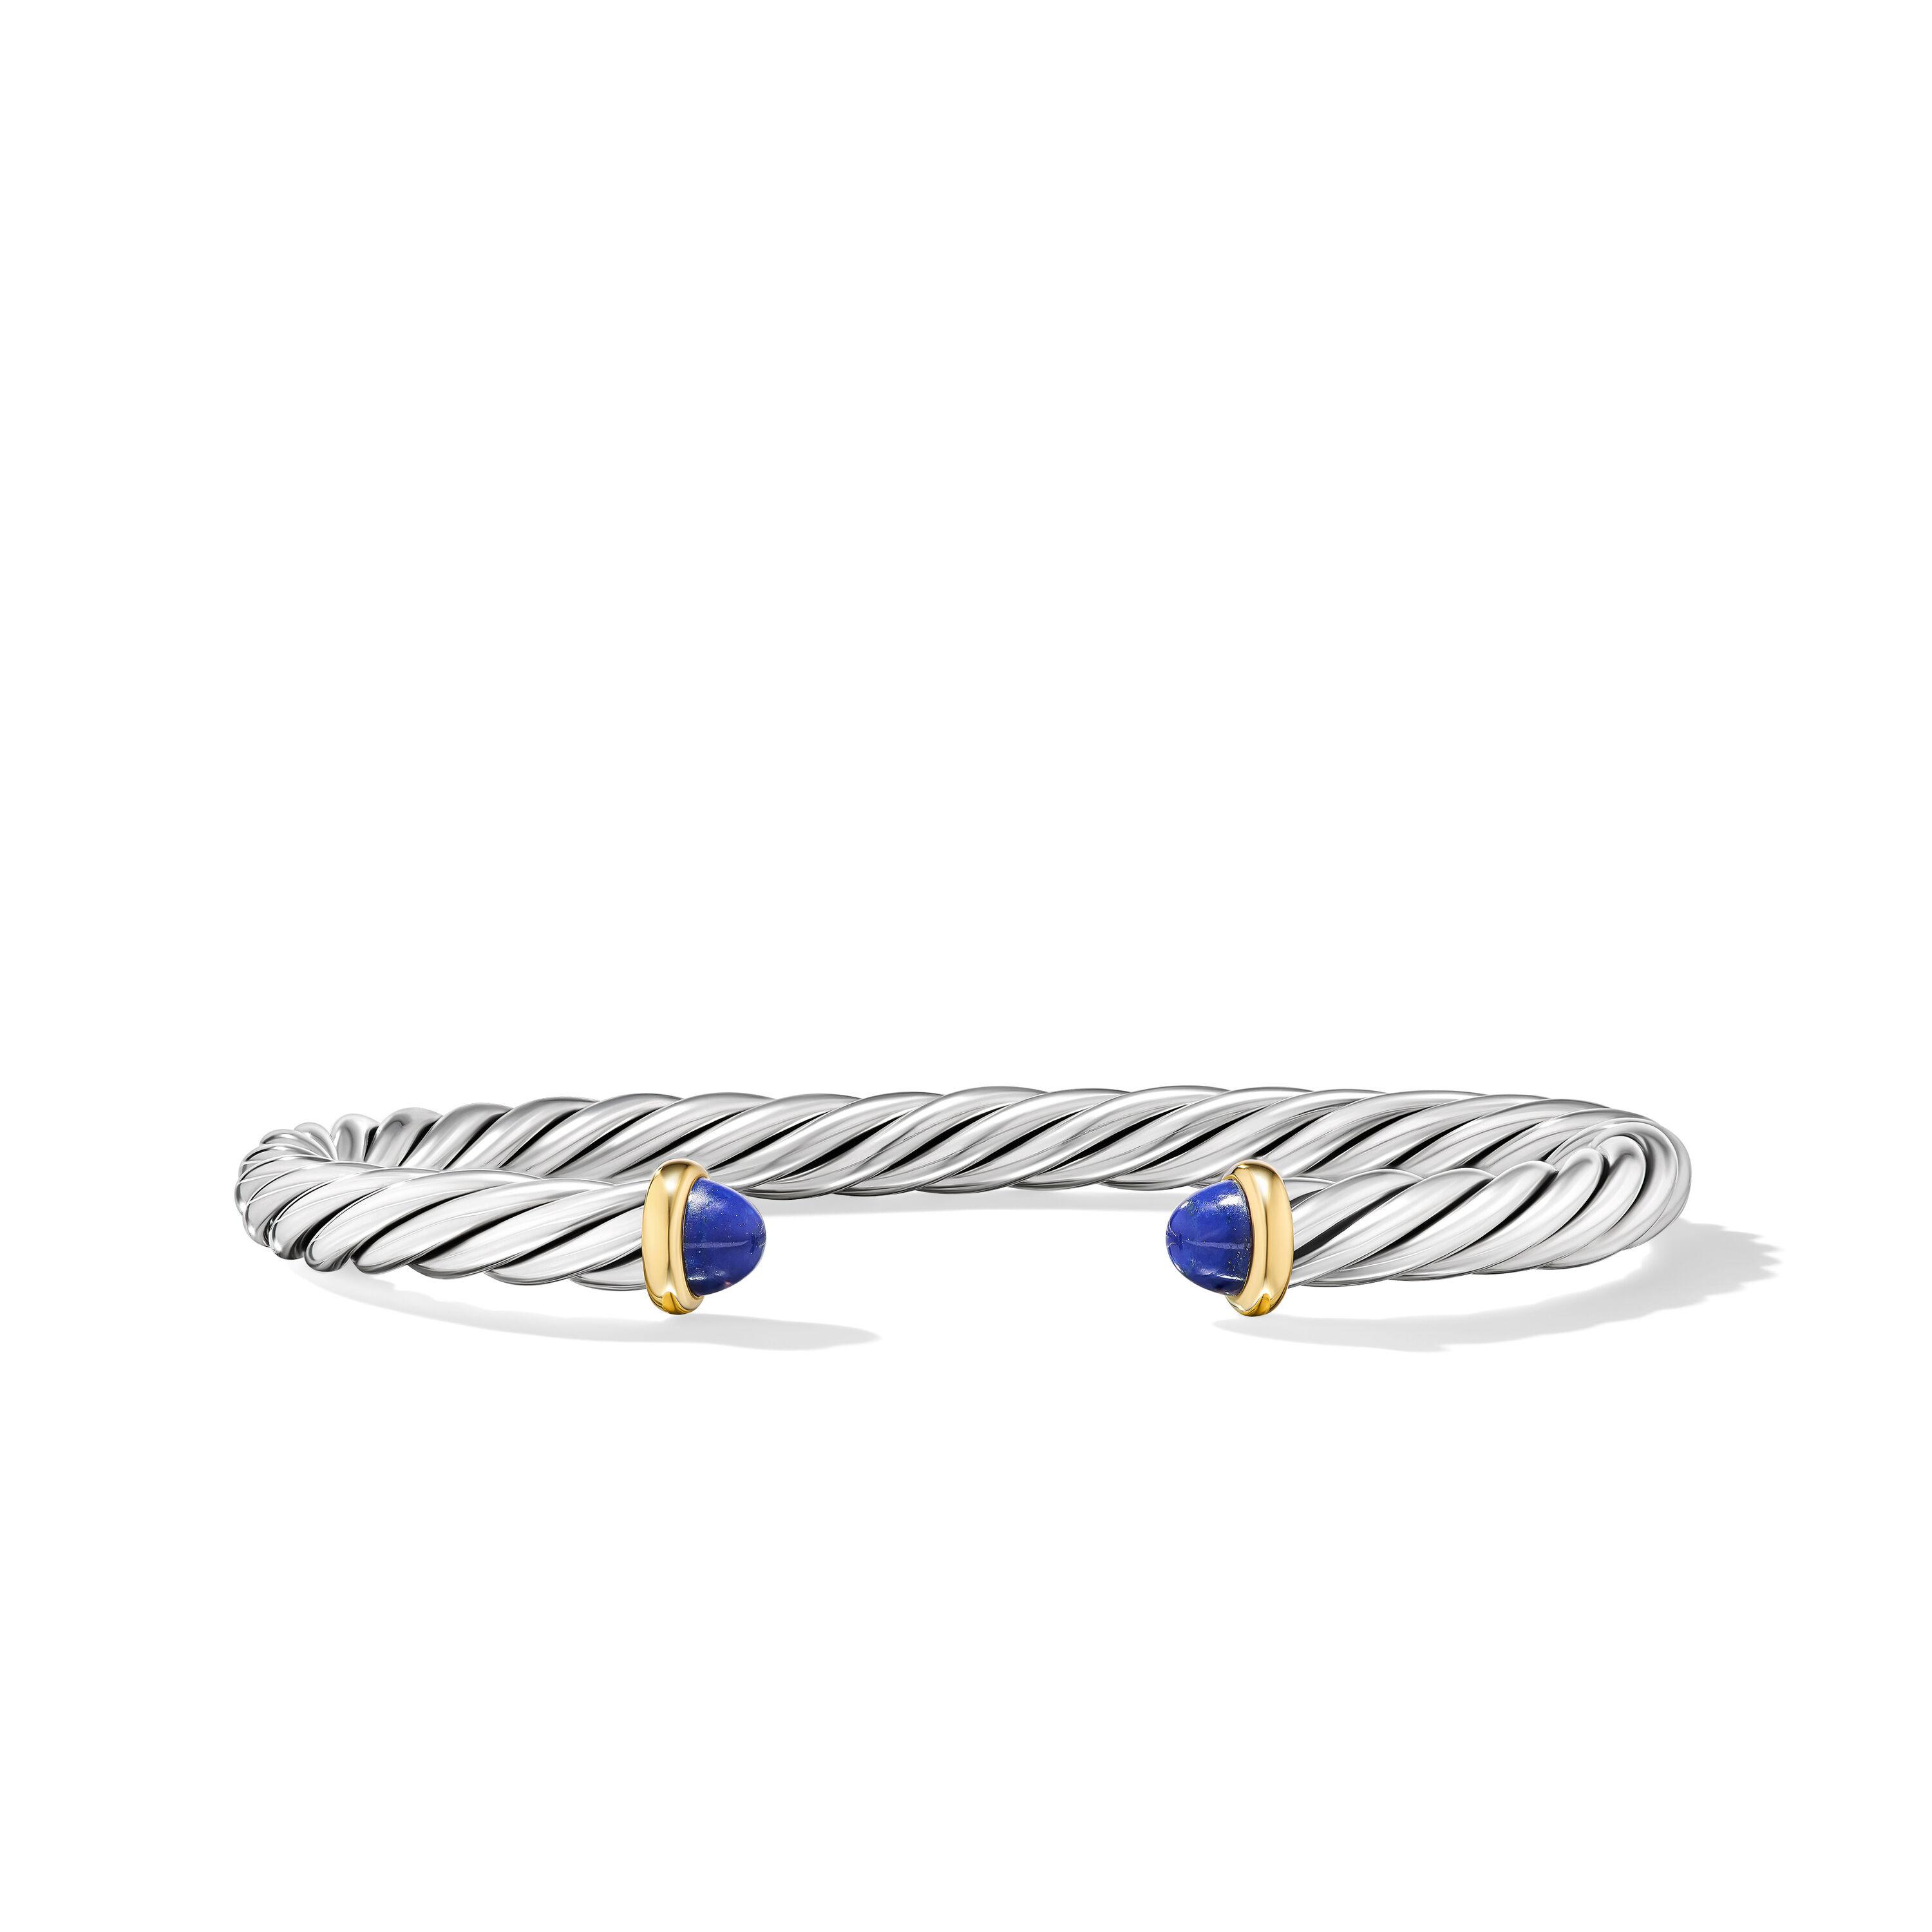 David Yurman 6mm Cable Cuff Bracelet in Sterling Silver with 14K Yellow Gold and Lapis, Large